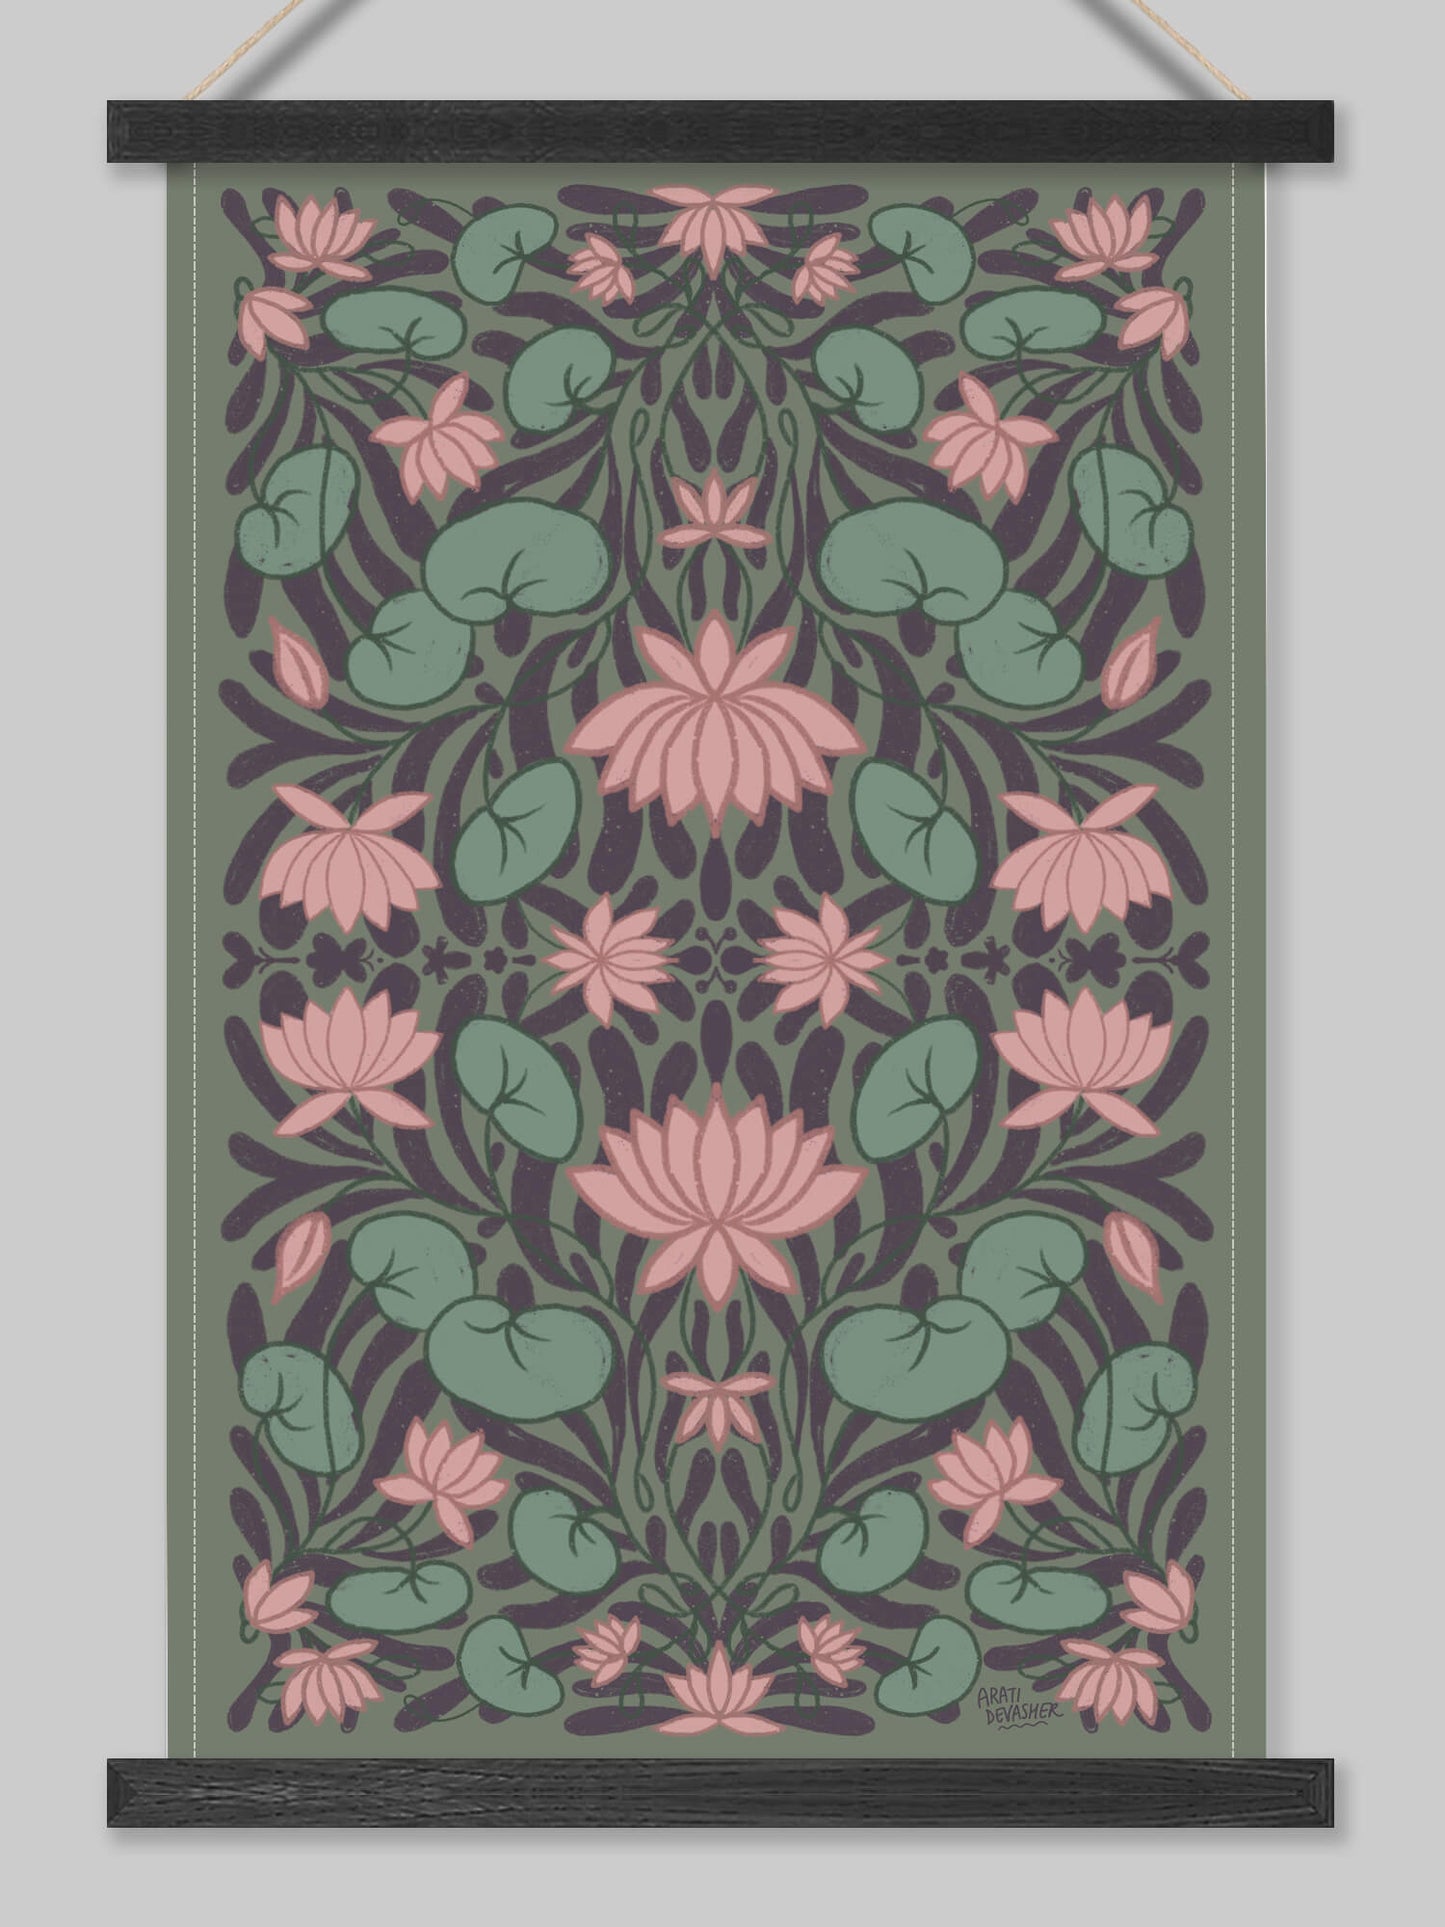 A Lotus Garden floral – (end of line) tea towel or wall hanging